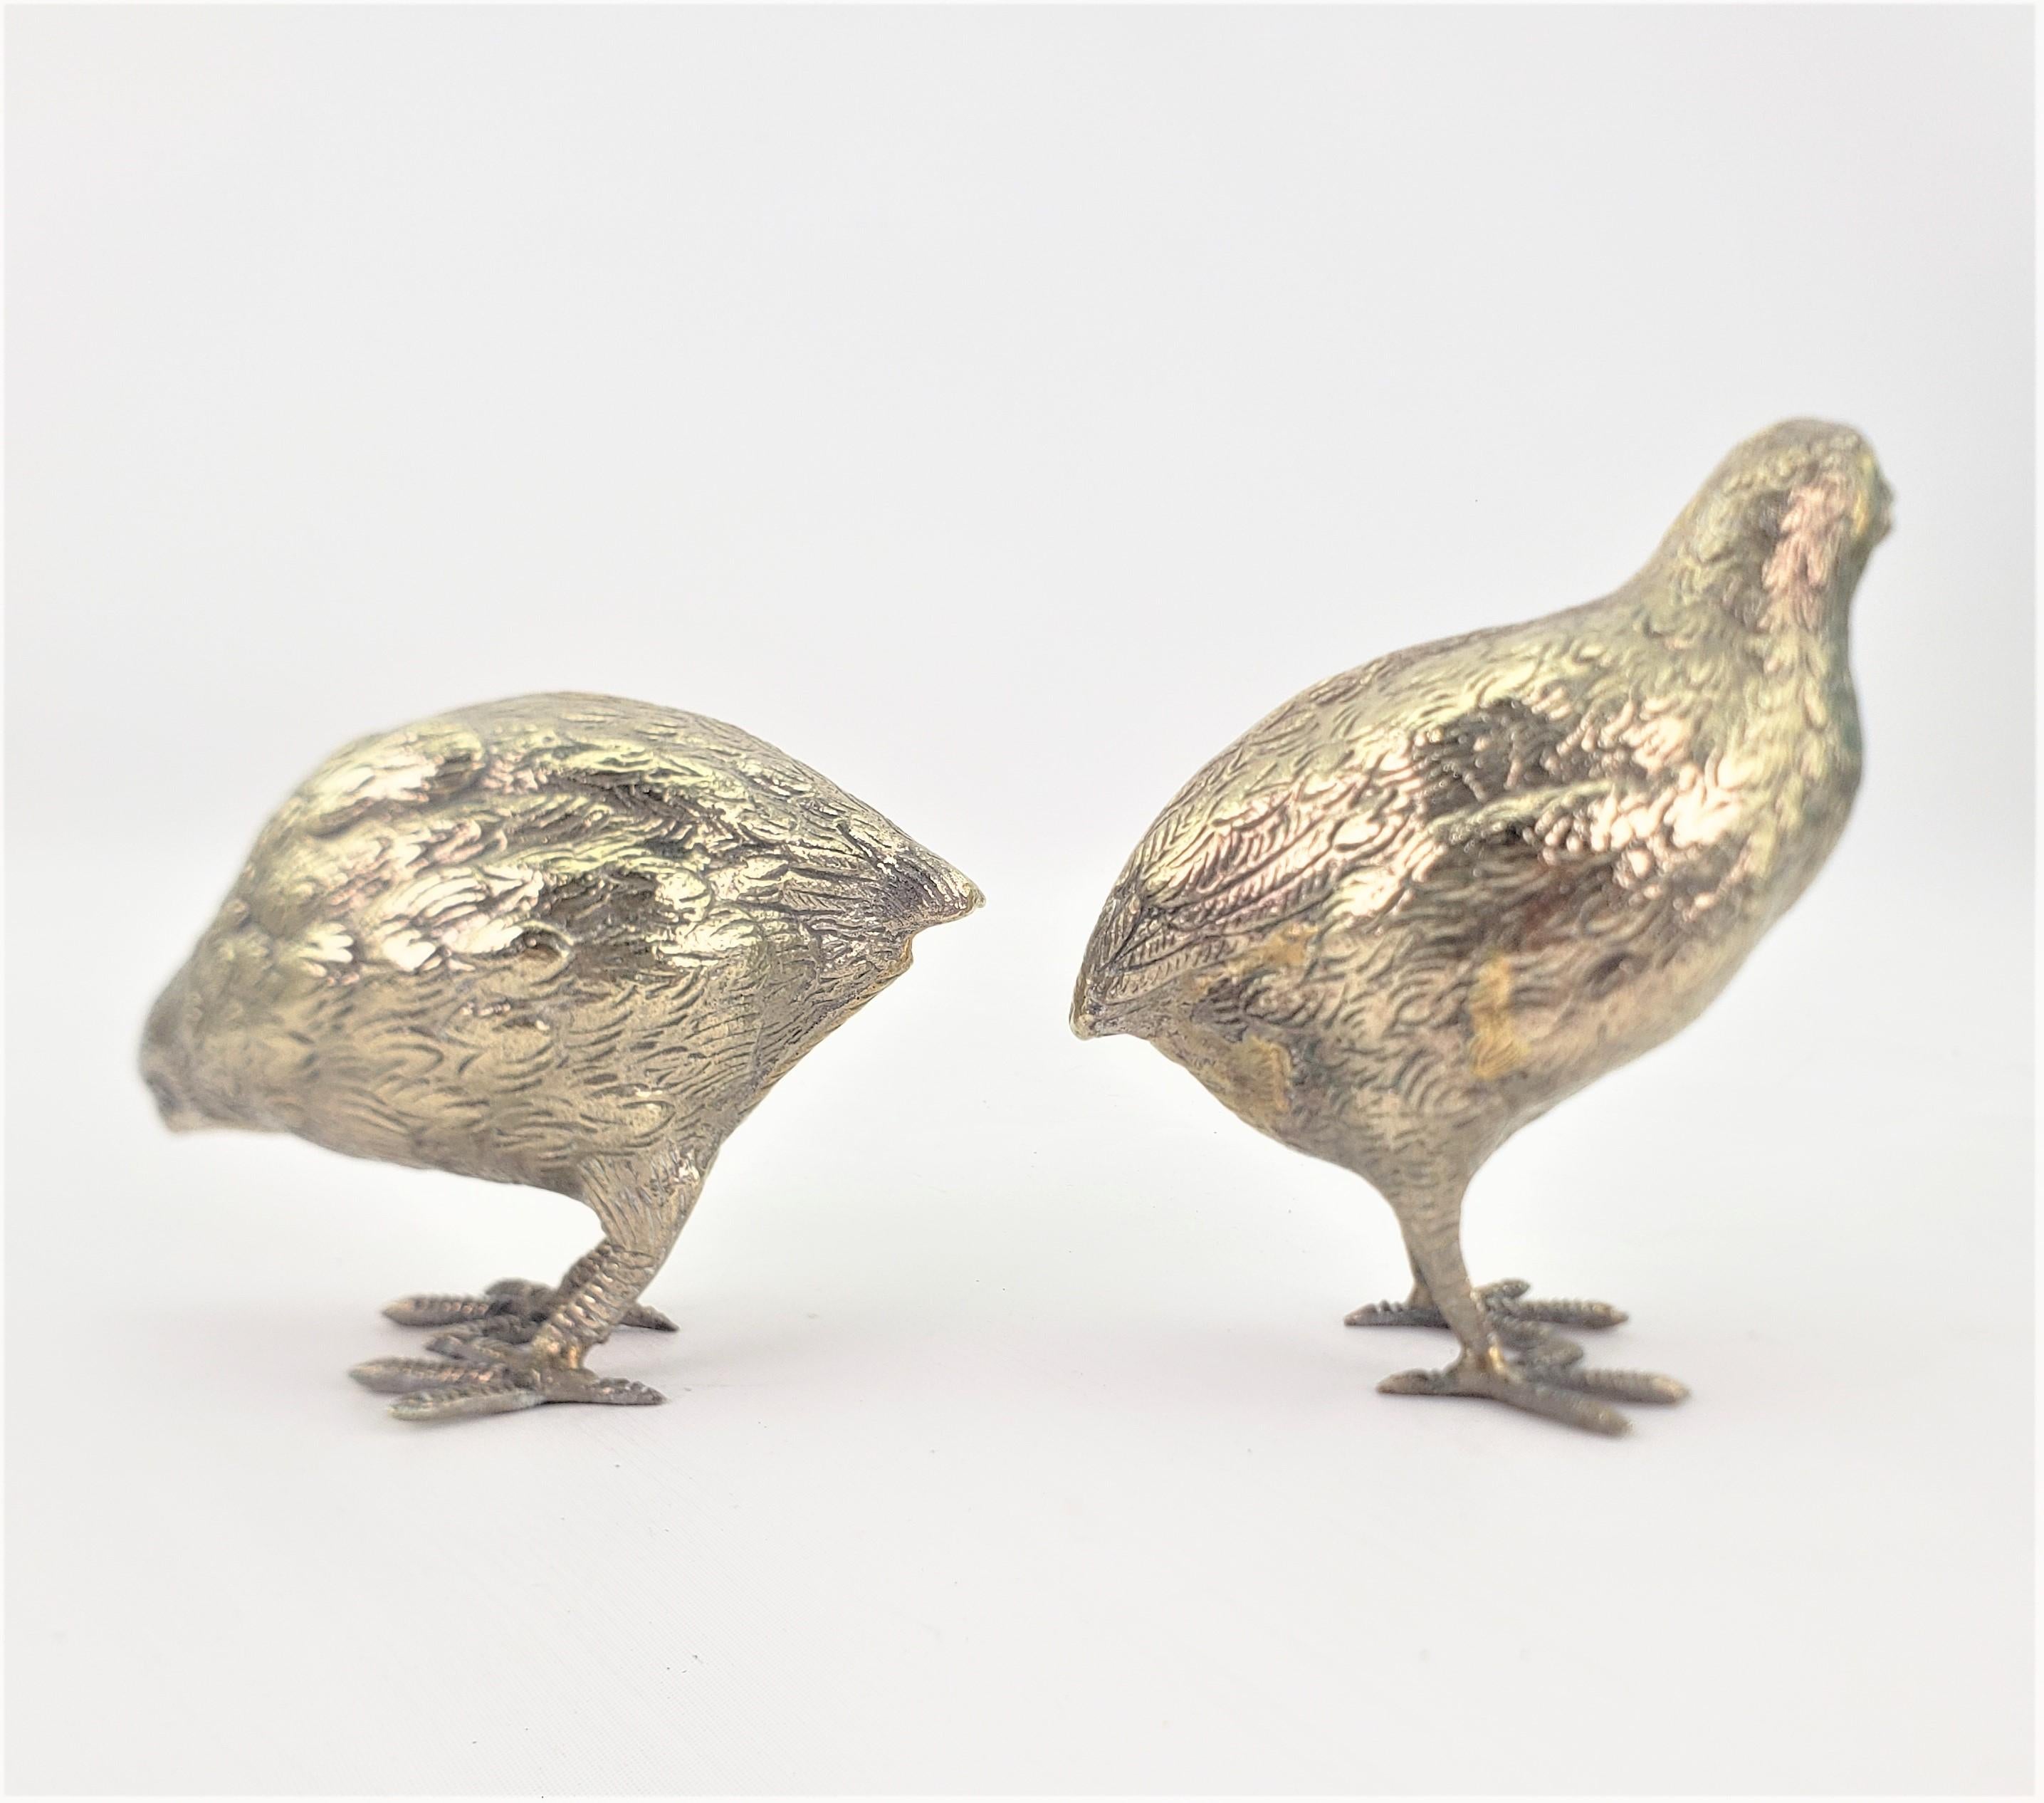 This pair of antique silver plated game birds are unsigned, but presumed to have been made in Europe, most likely Italy, in approximately 1890 in the period Victorian style. The birds are figural silver plated quails, and are nicely cast with